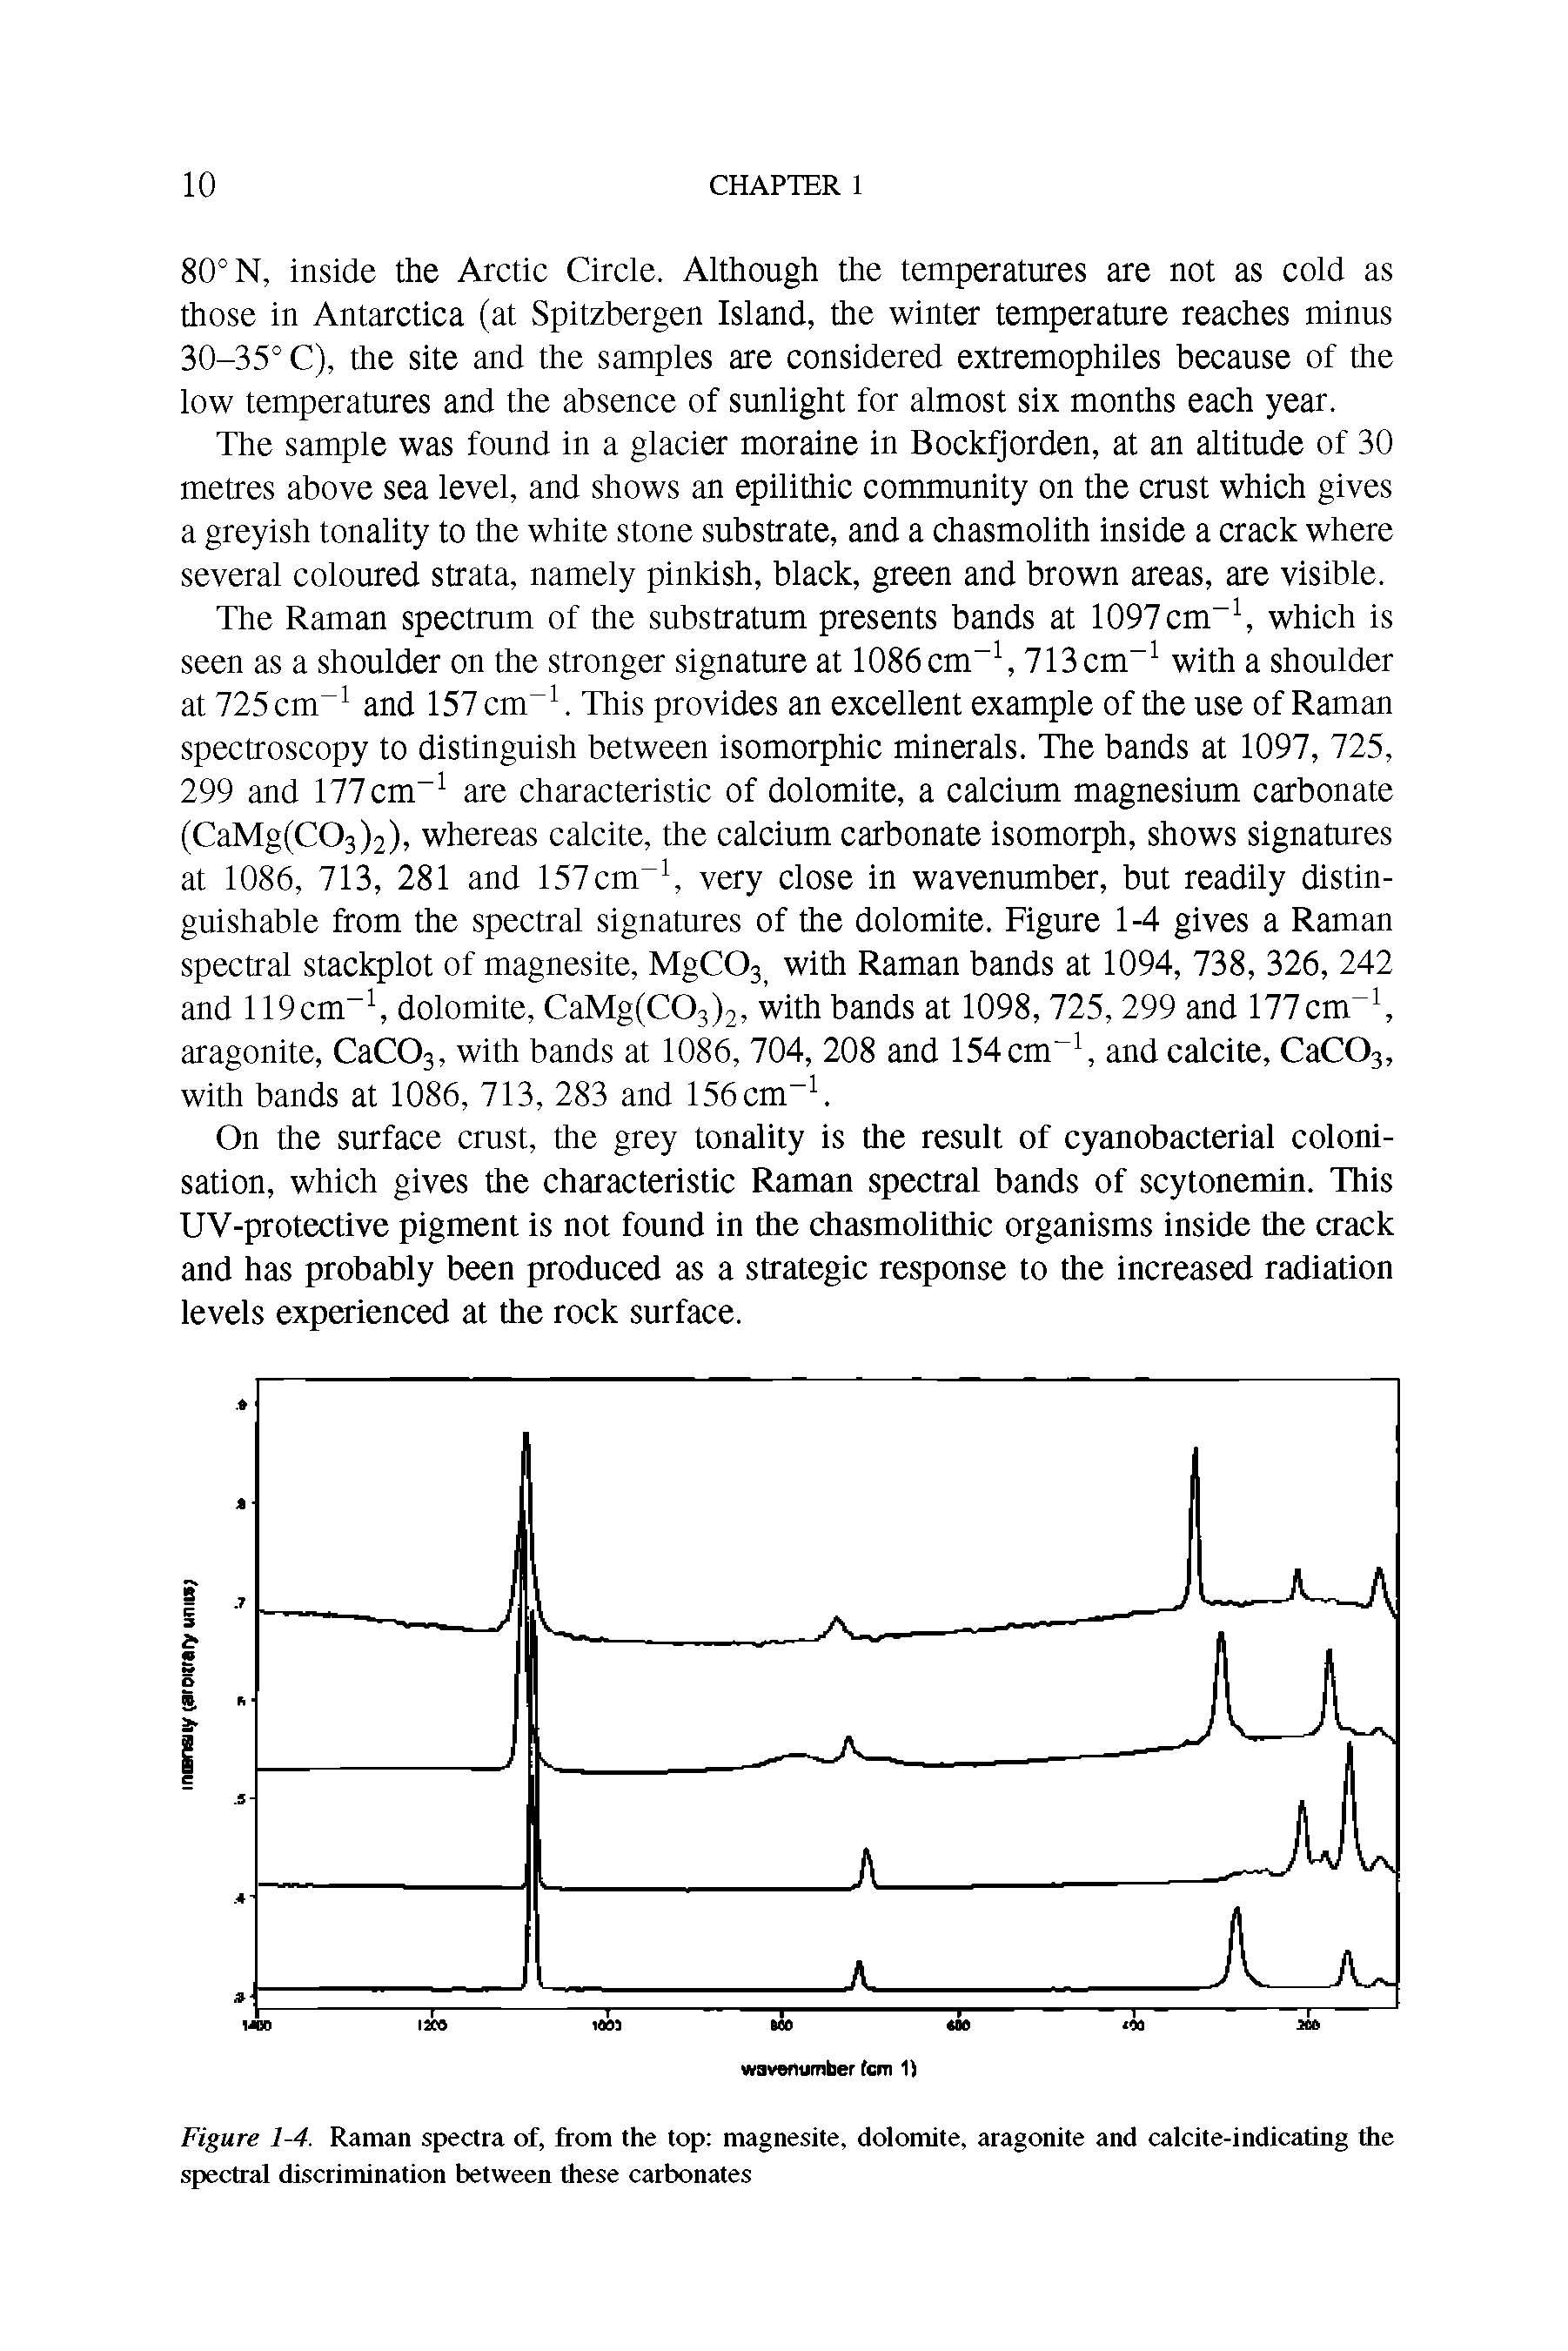 Figure 1-4. Raman spectra of, from the top magnesite, dolomite, aragonite and calcite-indicating the spectral discrimination between these carbonates...